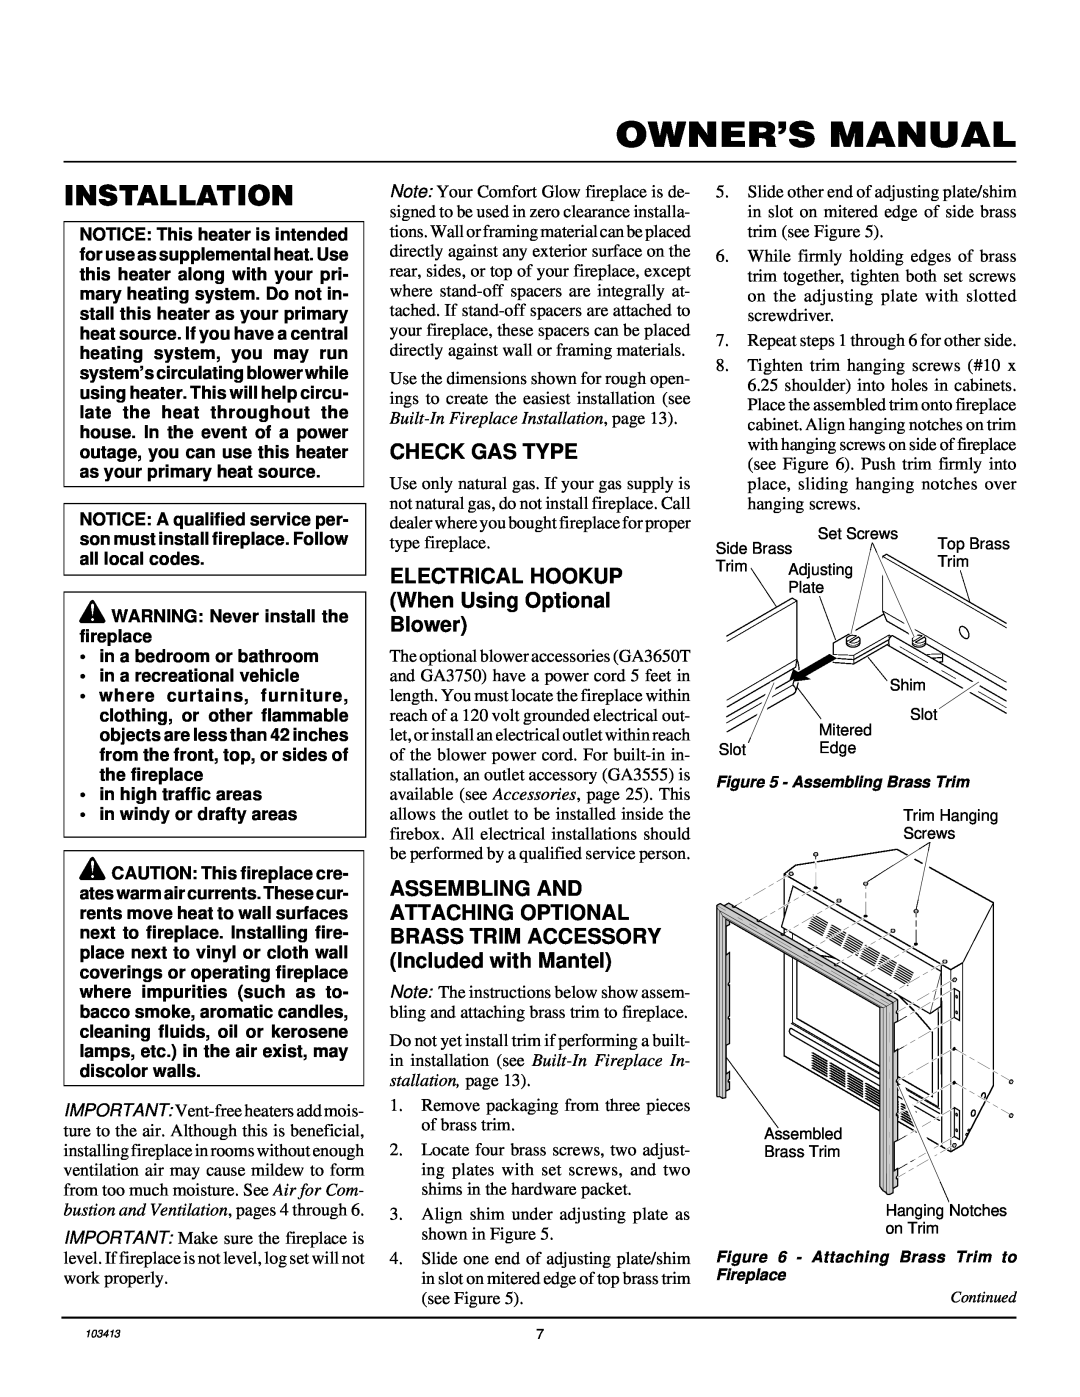 Desa CGFP28NT installation manual Installation, Check Gas Type, ELECTRICAL HOOKUP When Using Optional Blower 